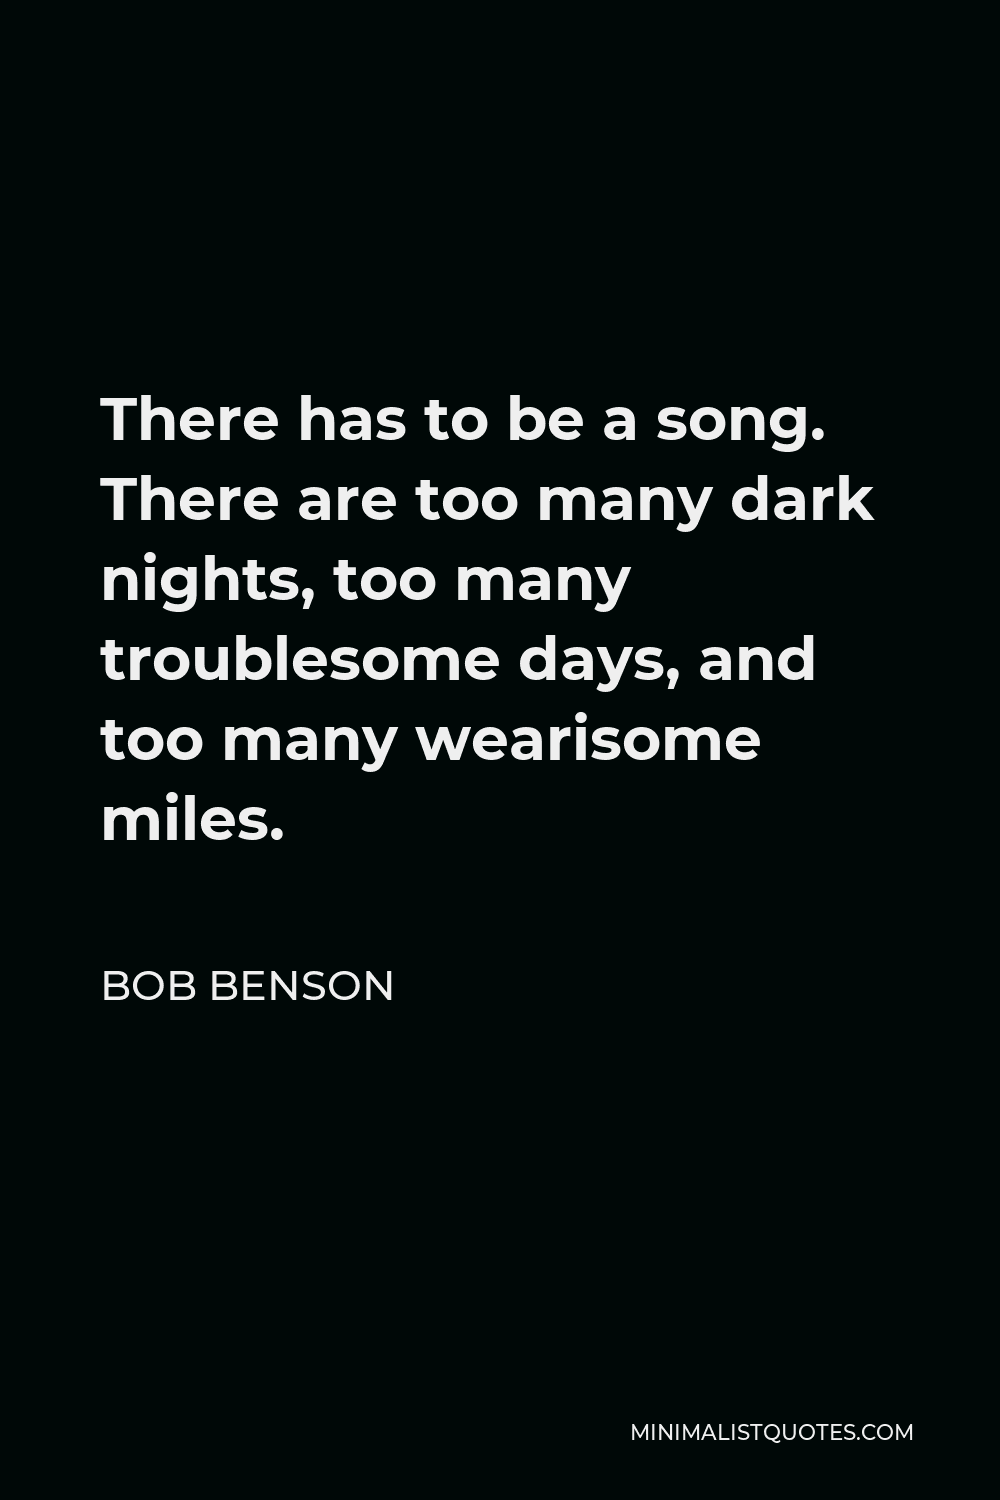 Bob Benson Quote - There has to be a song. There are too many dark nights, too many troublesome days, and too many wearisome miles.